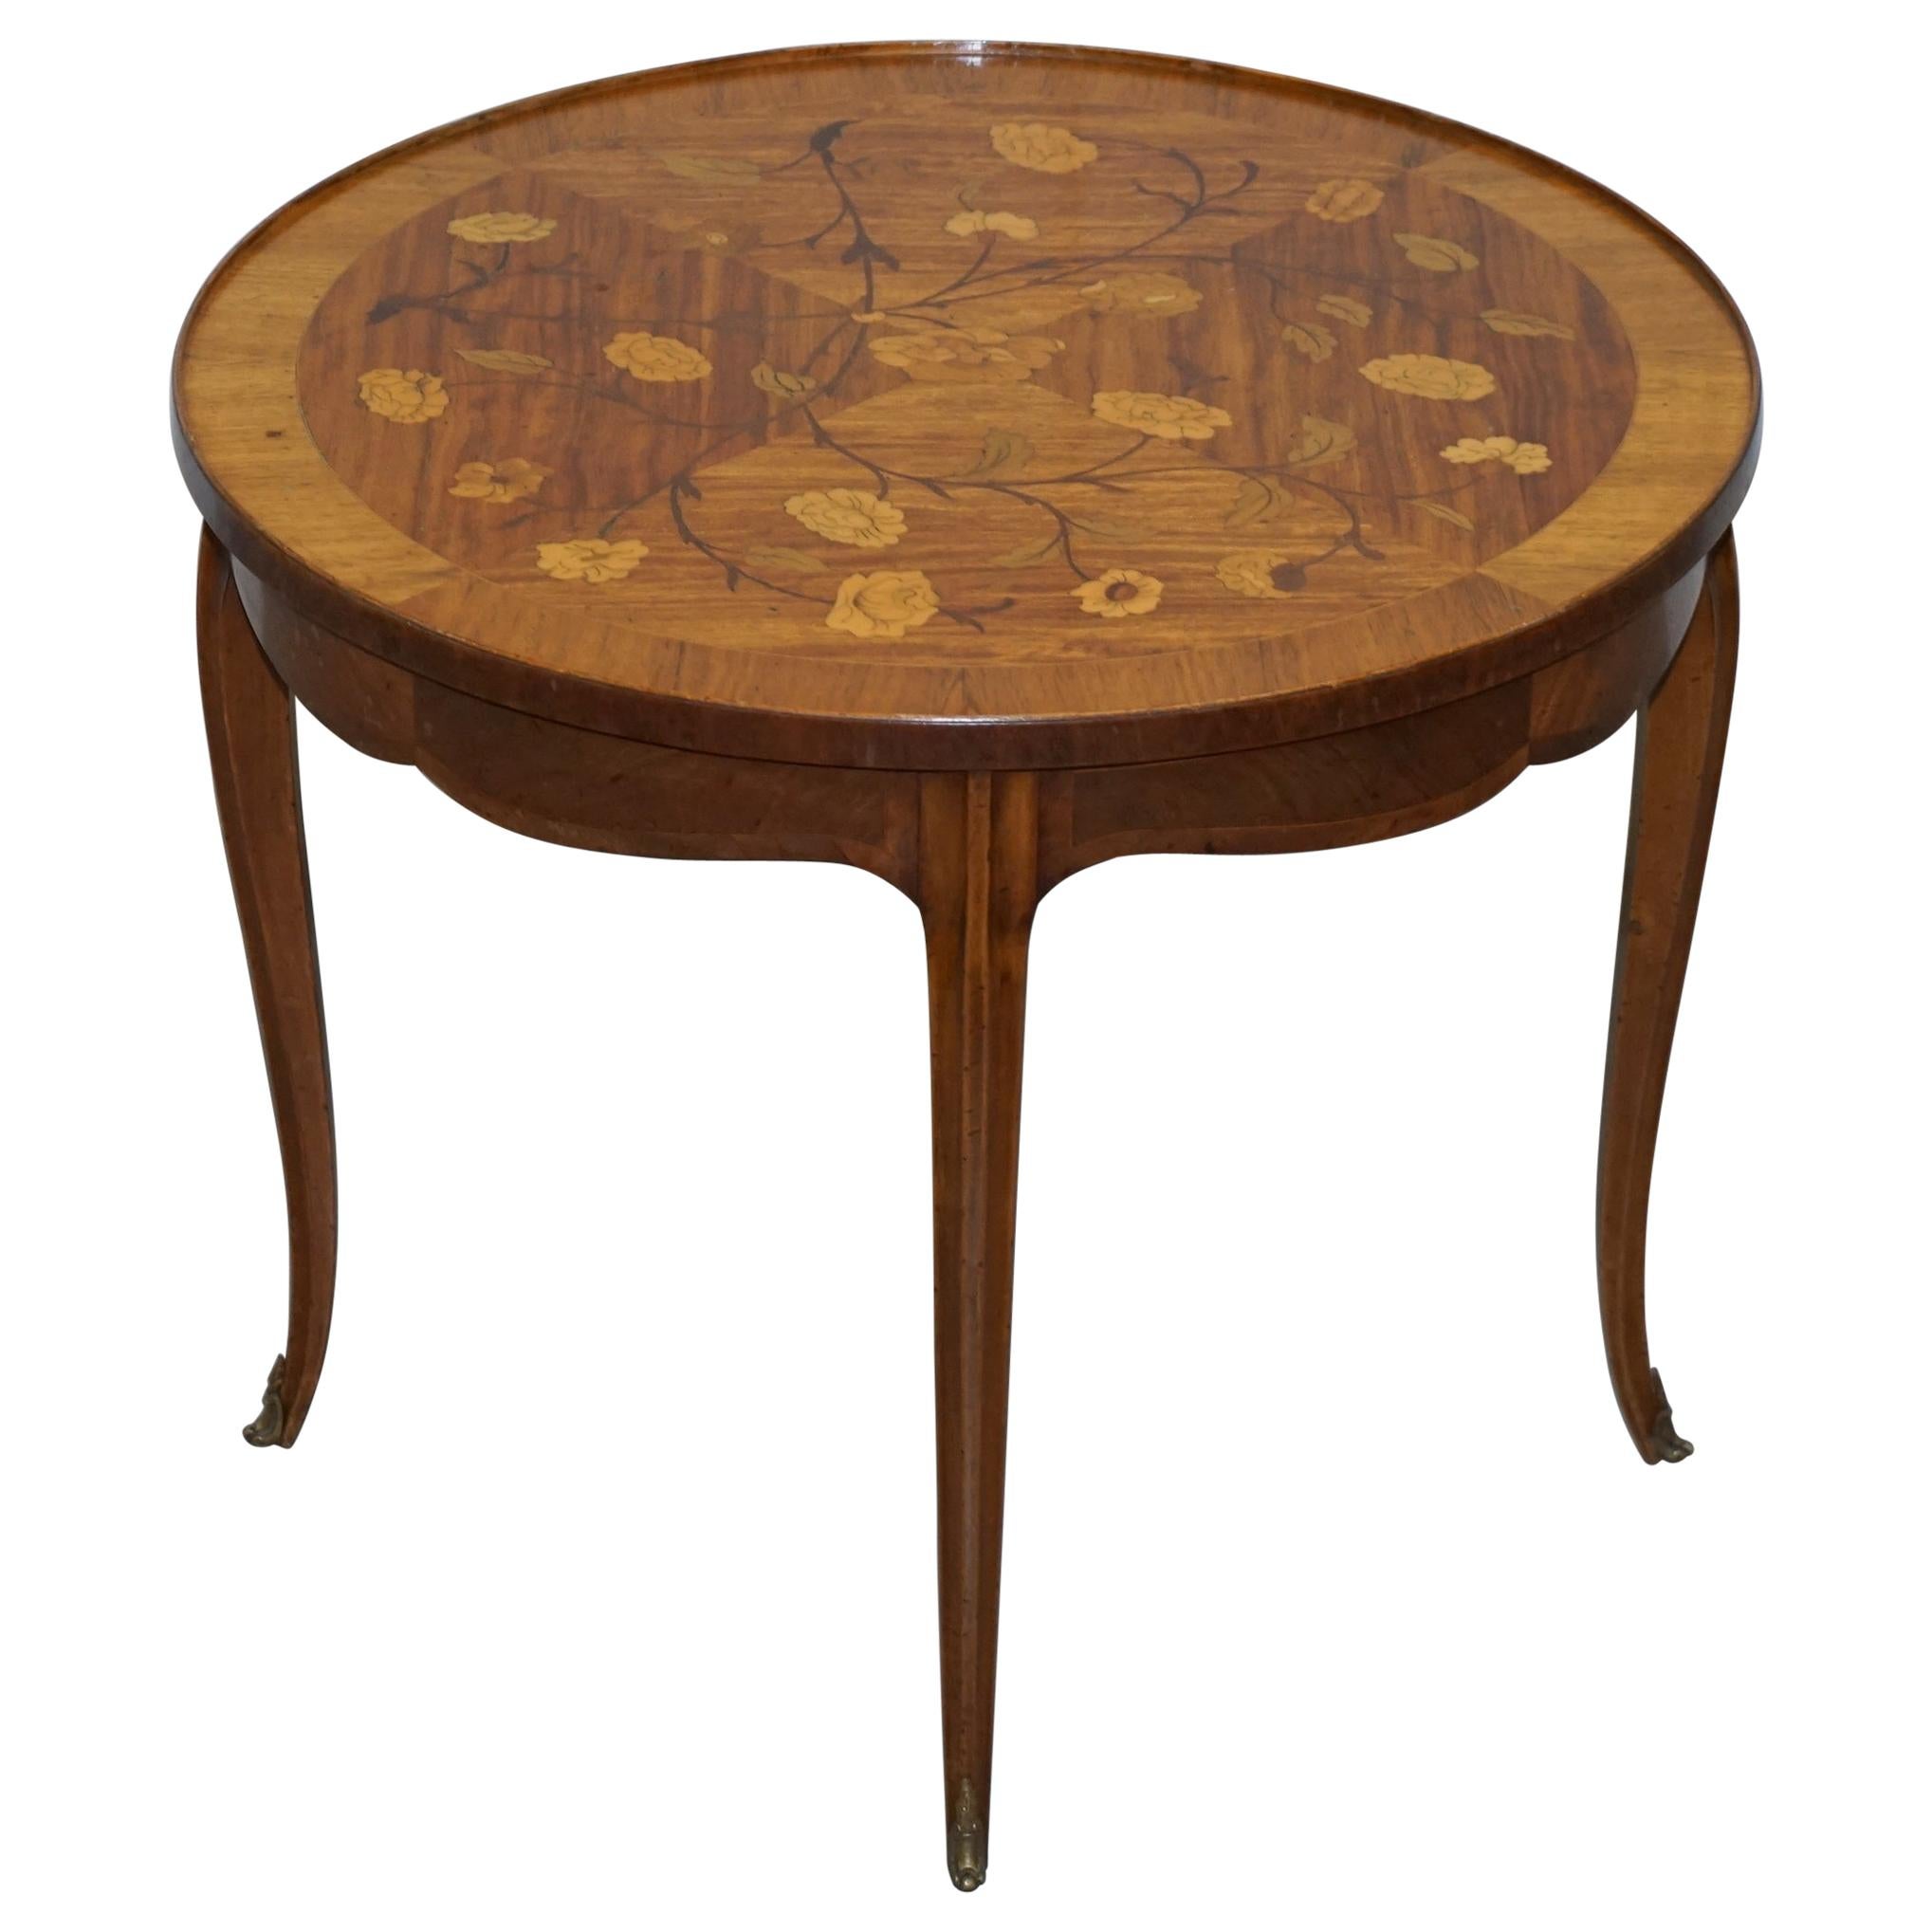 Sublime circa 1900 Italian Marquetry Inlaid in Centre Occasional Table Bronze For Sale